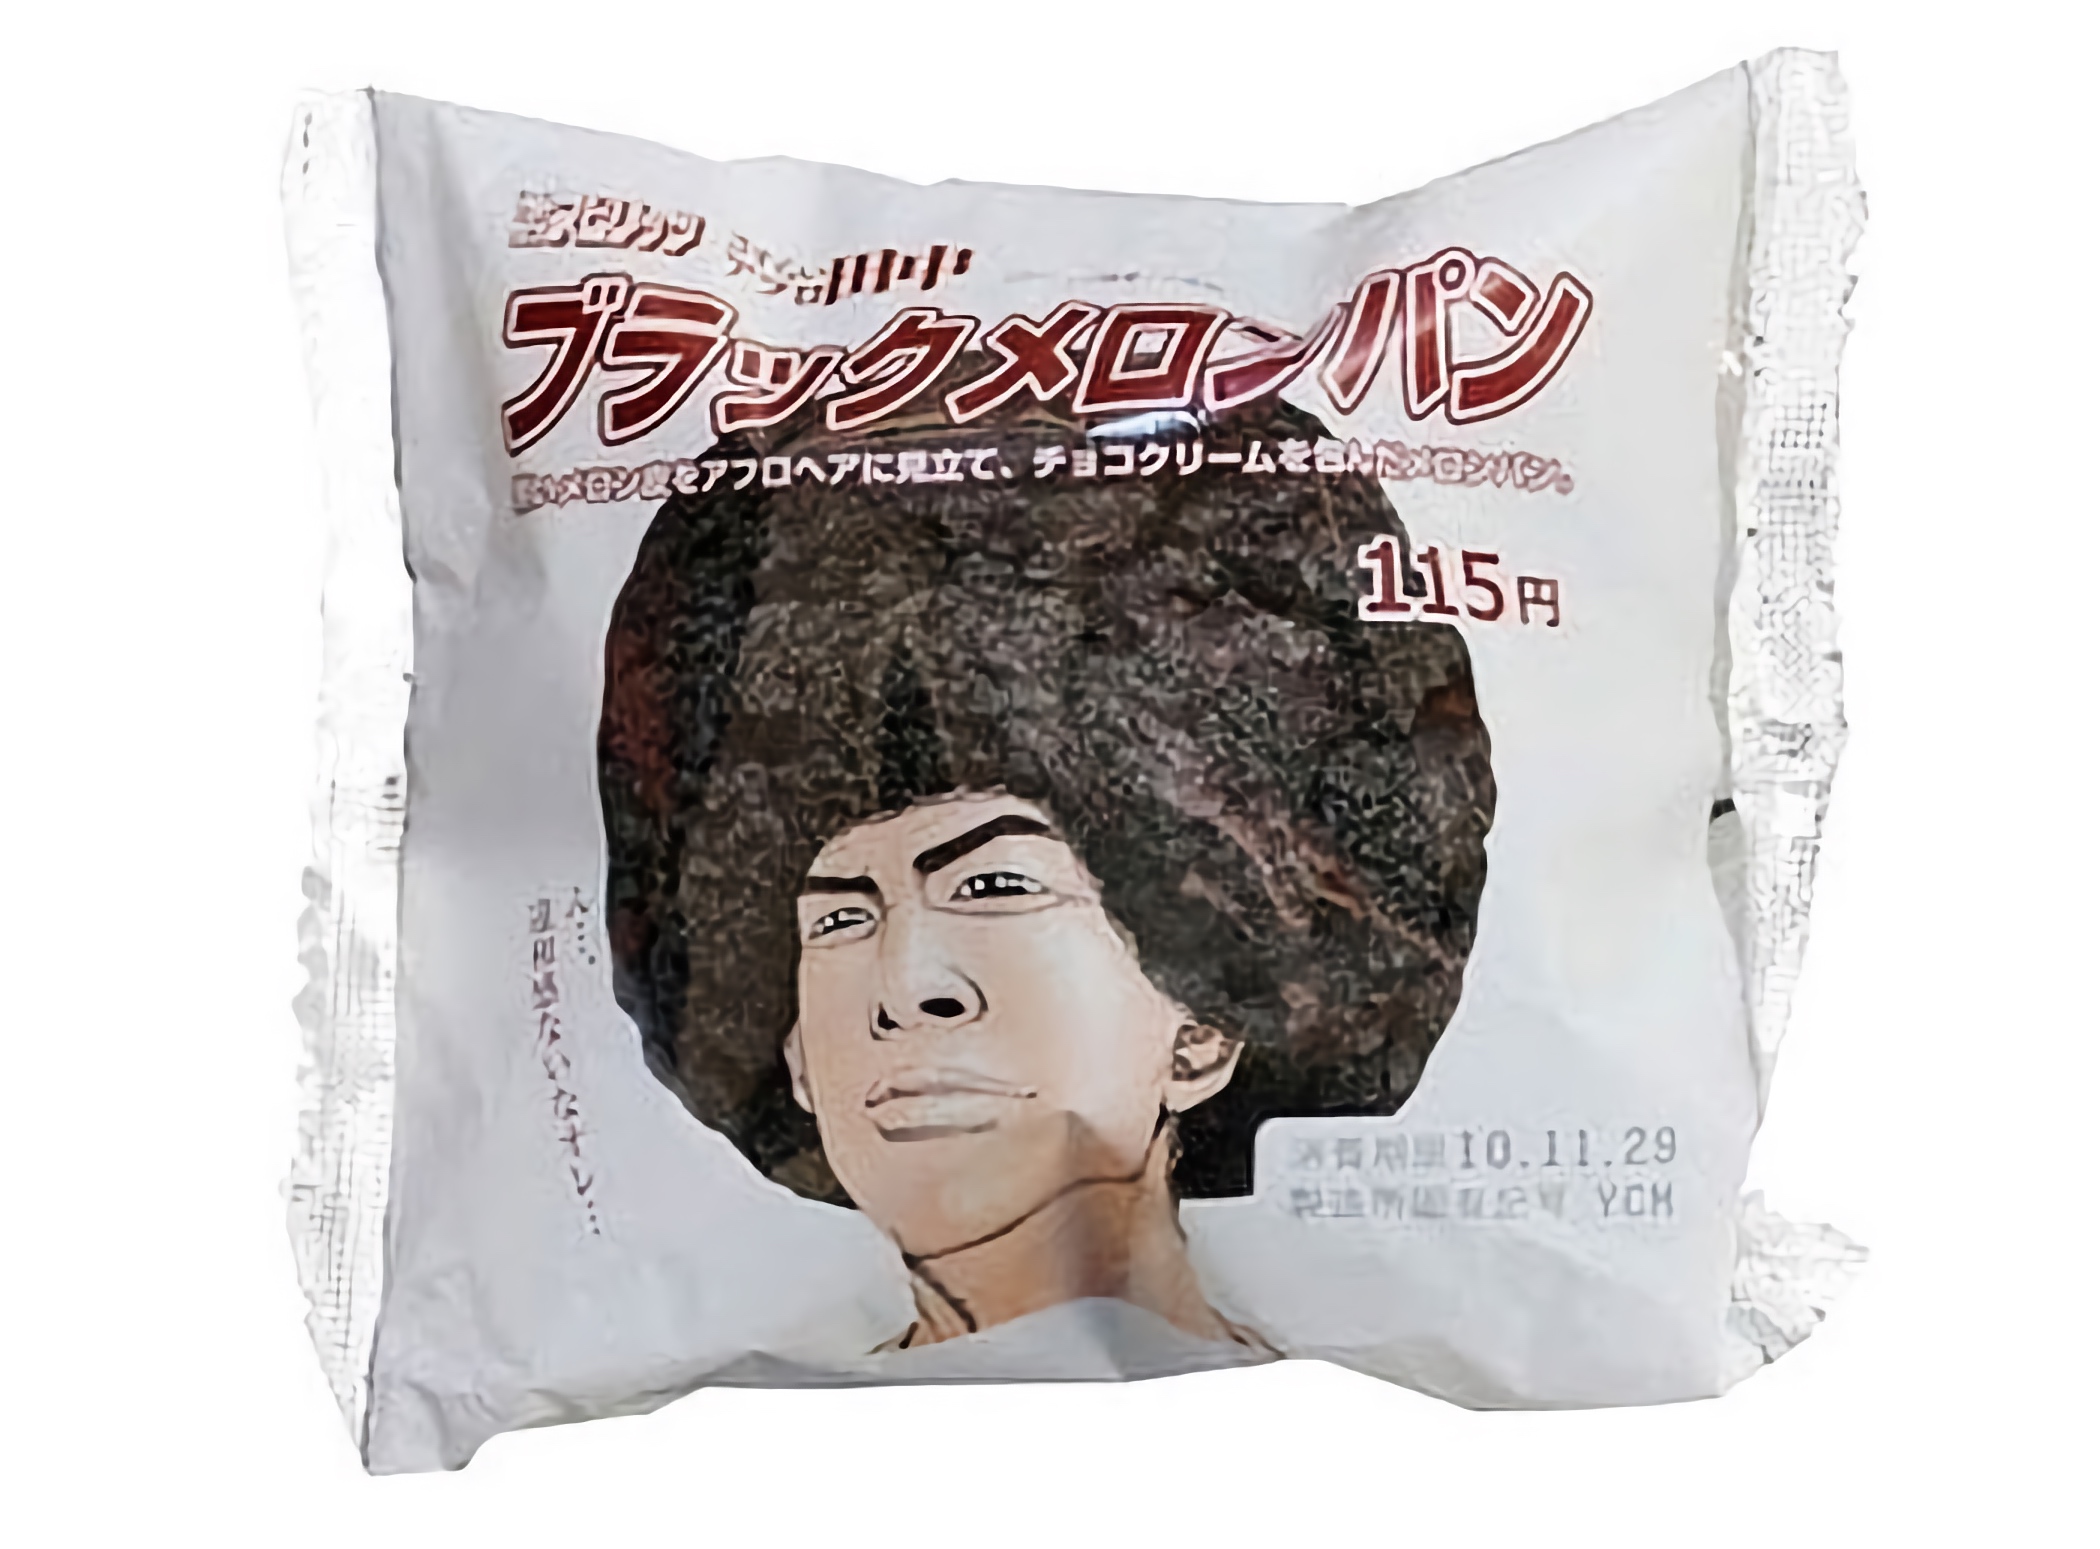 Afro Cookie Wrapper